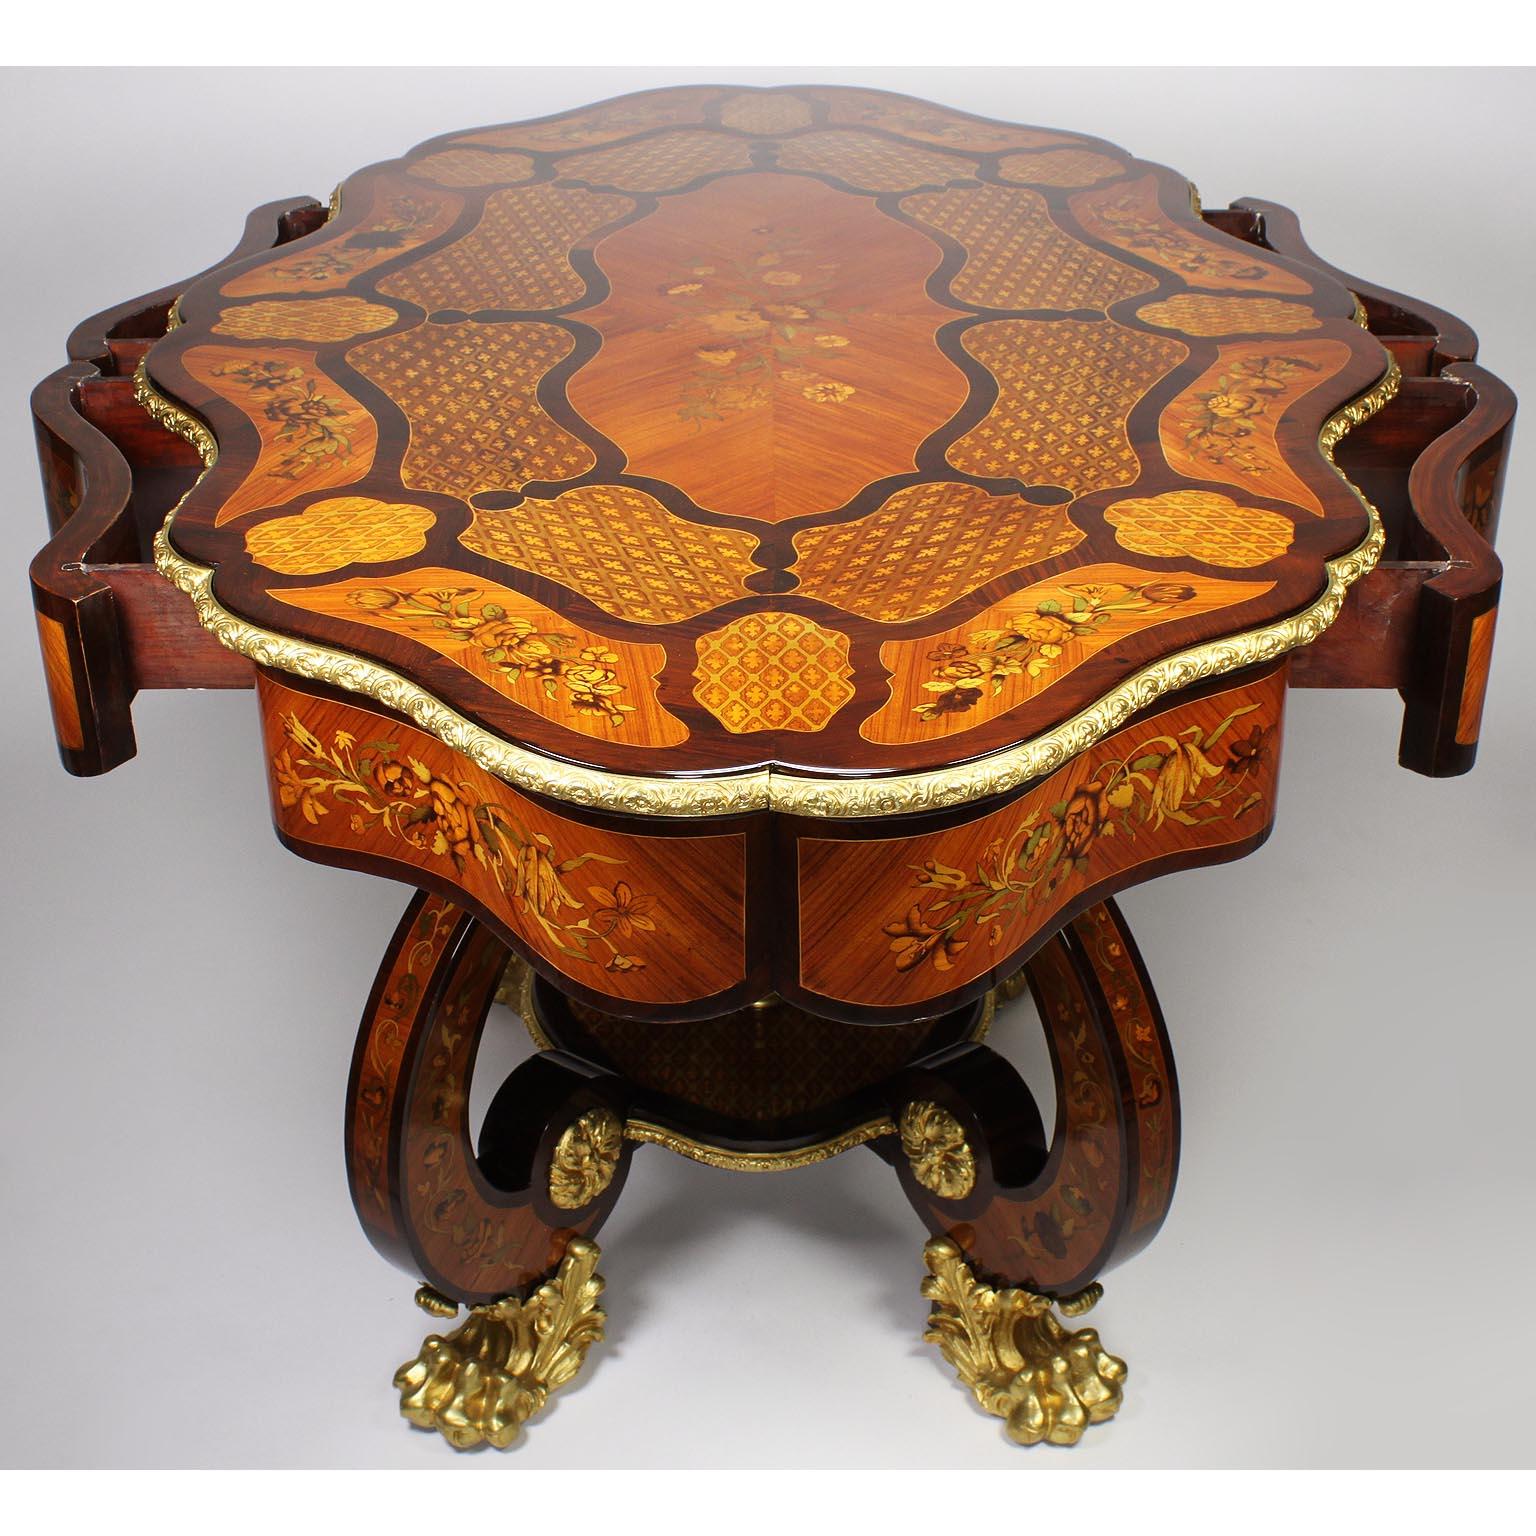 Fine Italian 19th Century Floral Marquetry Gilt Bronze-Mounted Center Table Desk For Sale 12